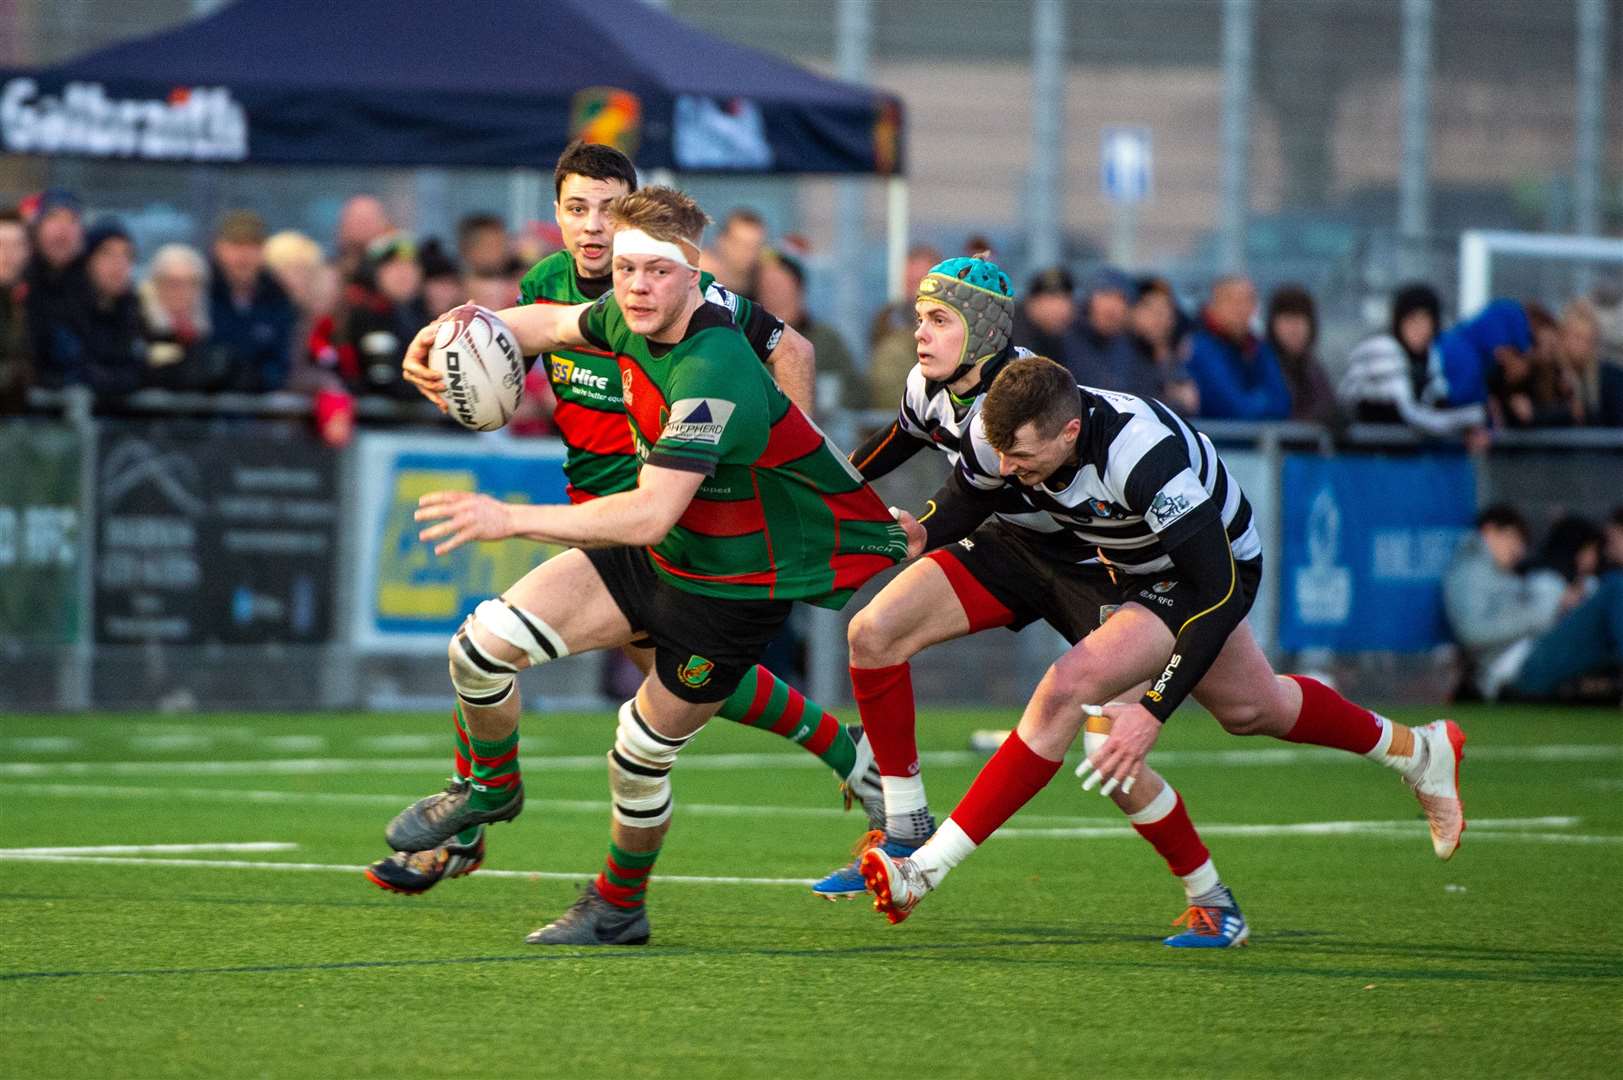 Highland face a crucial match in their bid to finish the National One season as runners-up as they return to action after the winter break at Heriot's Blues. Picture: Callum Mackay